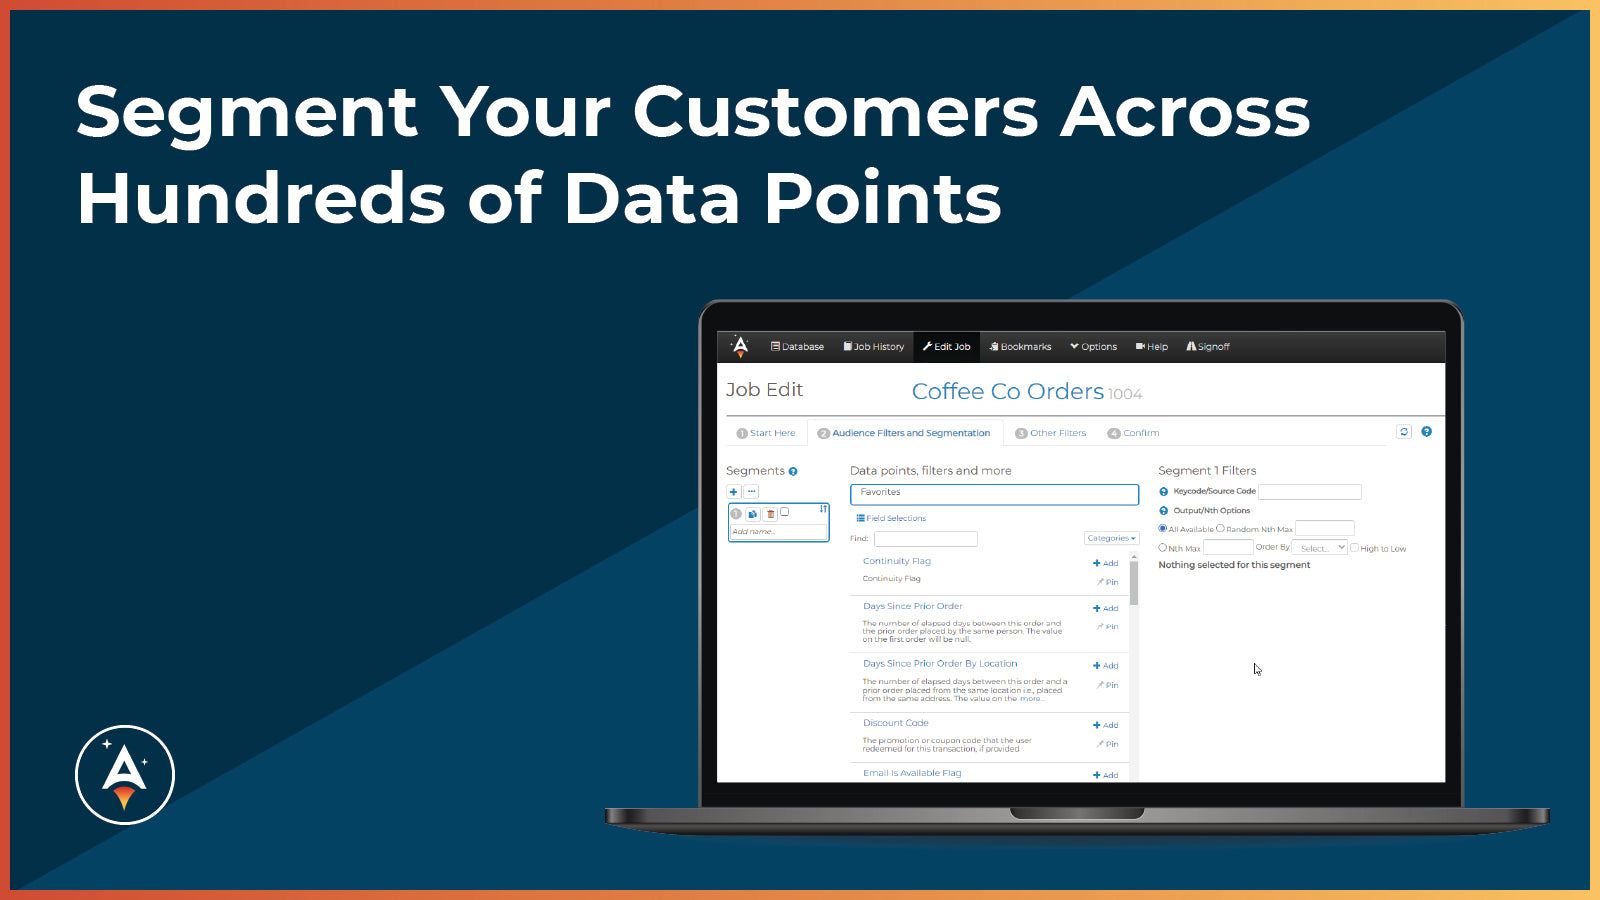 Segment your customers across hundreds of data points.